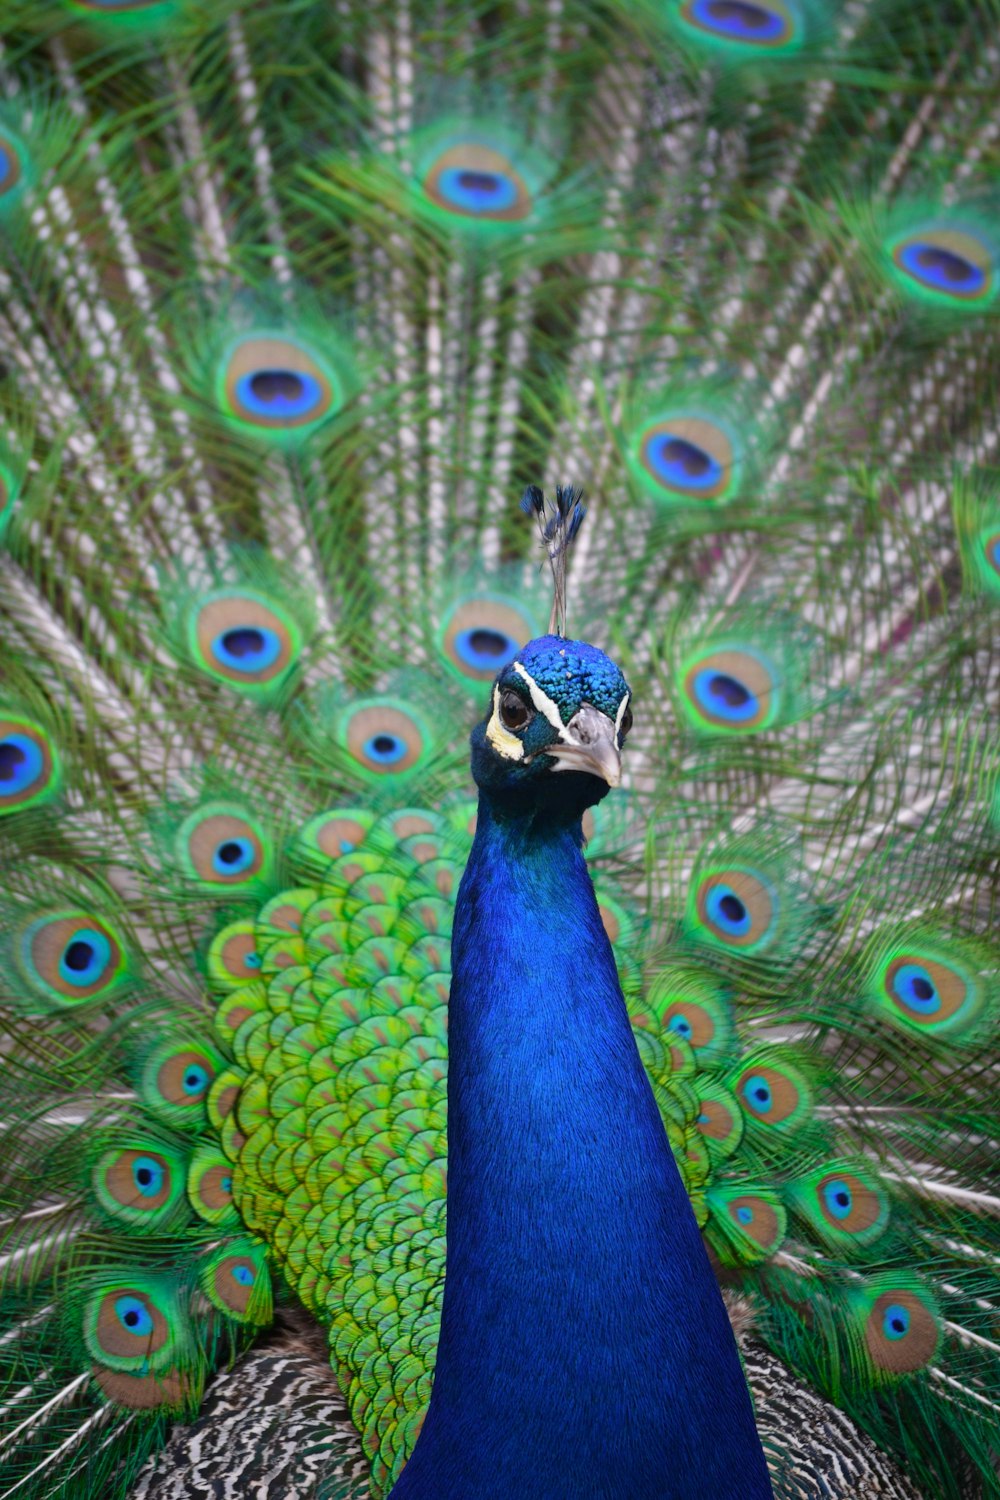 a peacock with its feathers spread